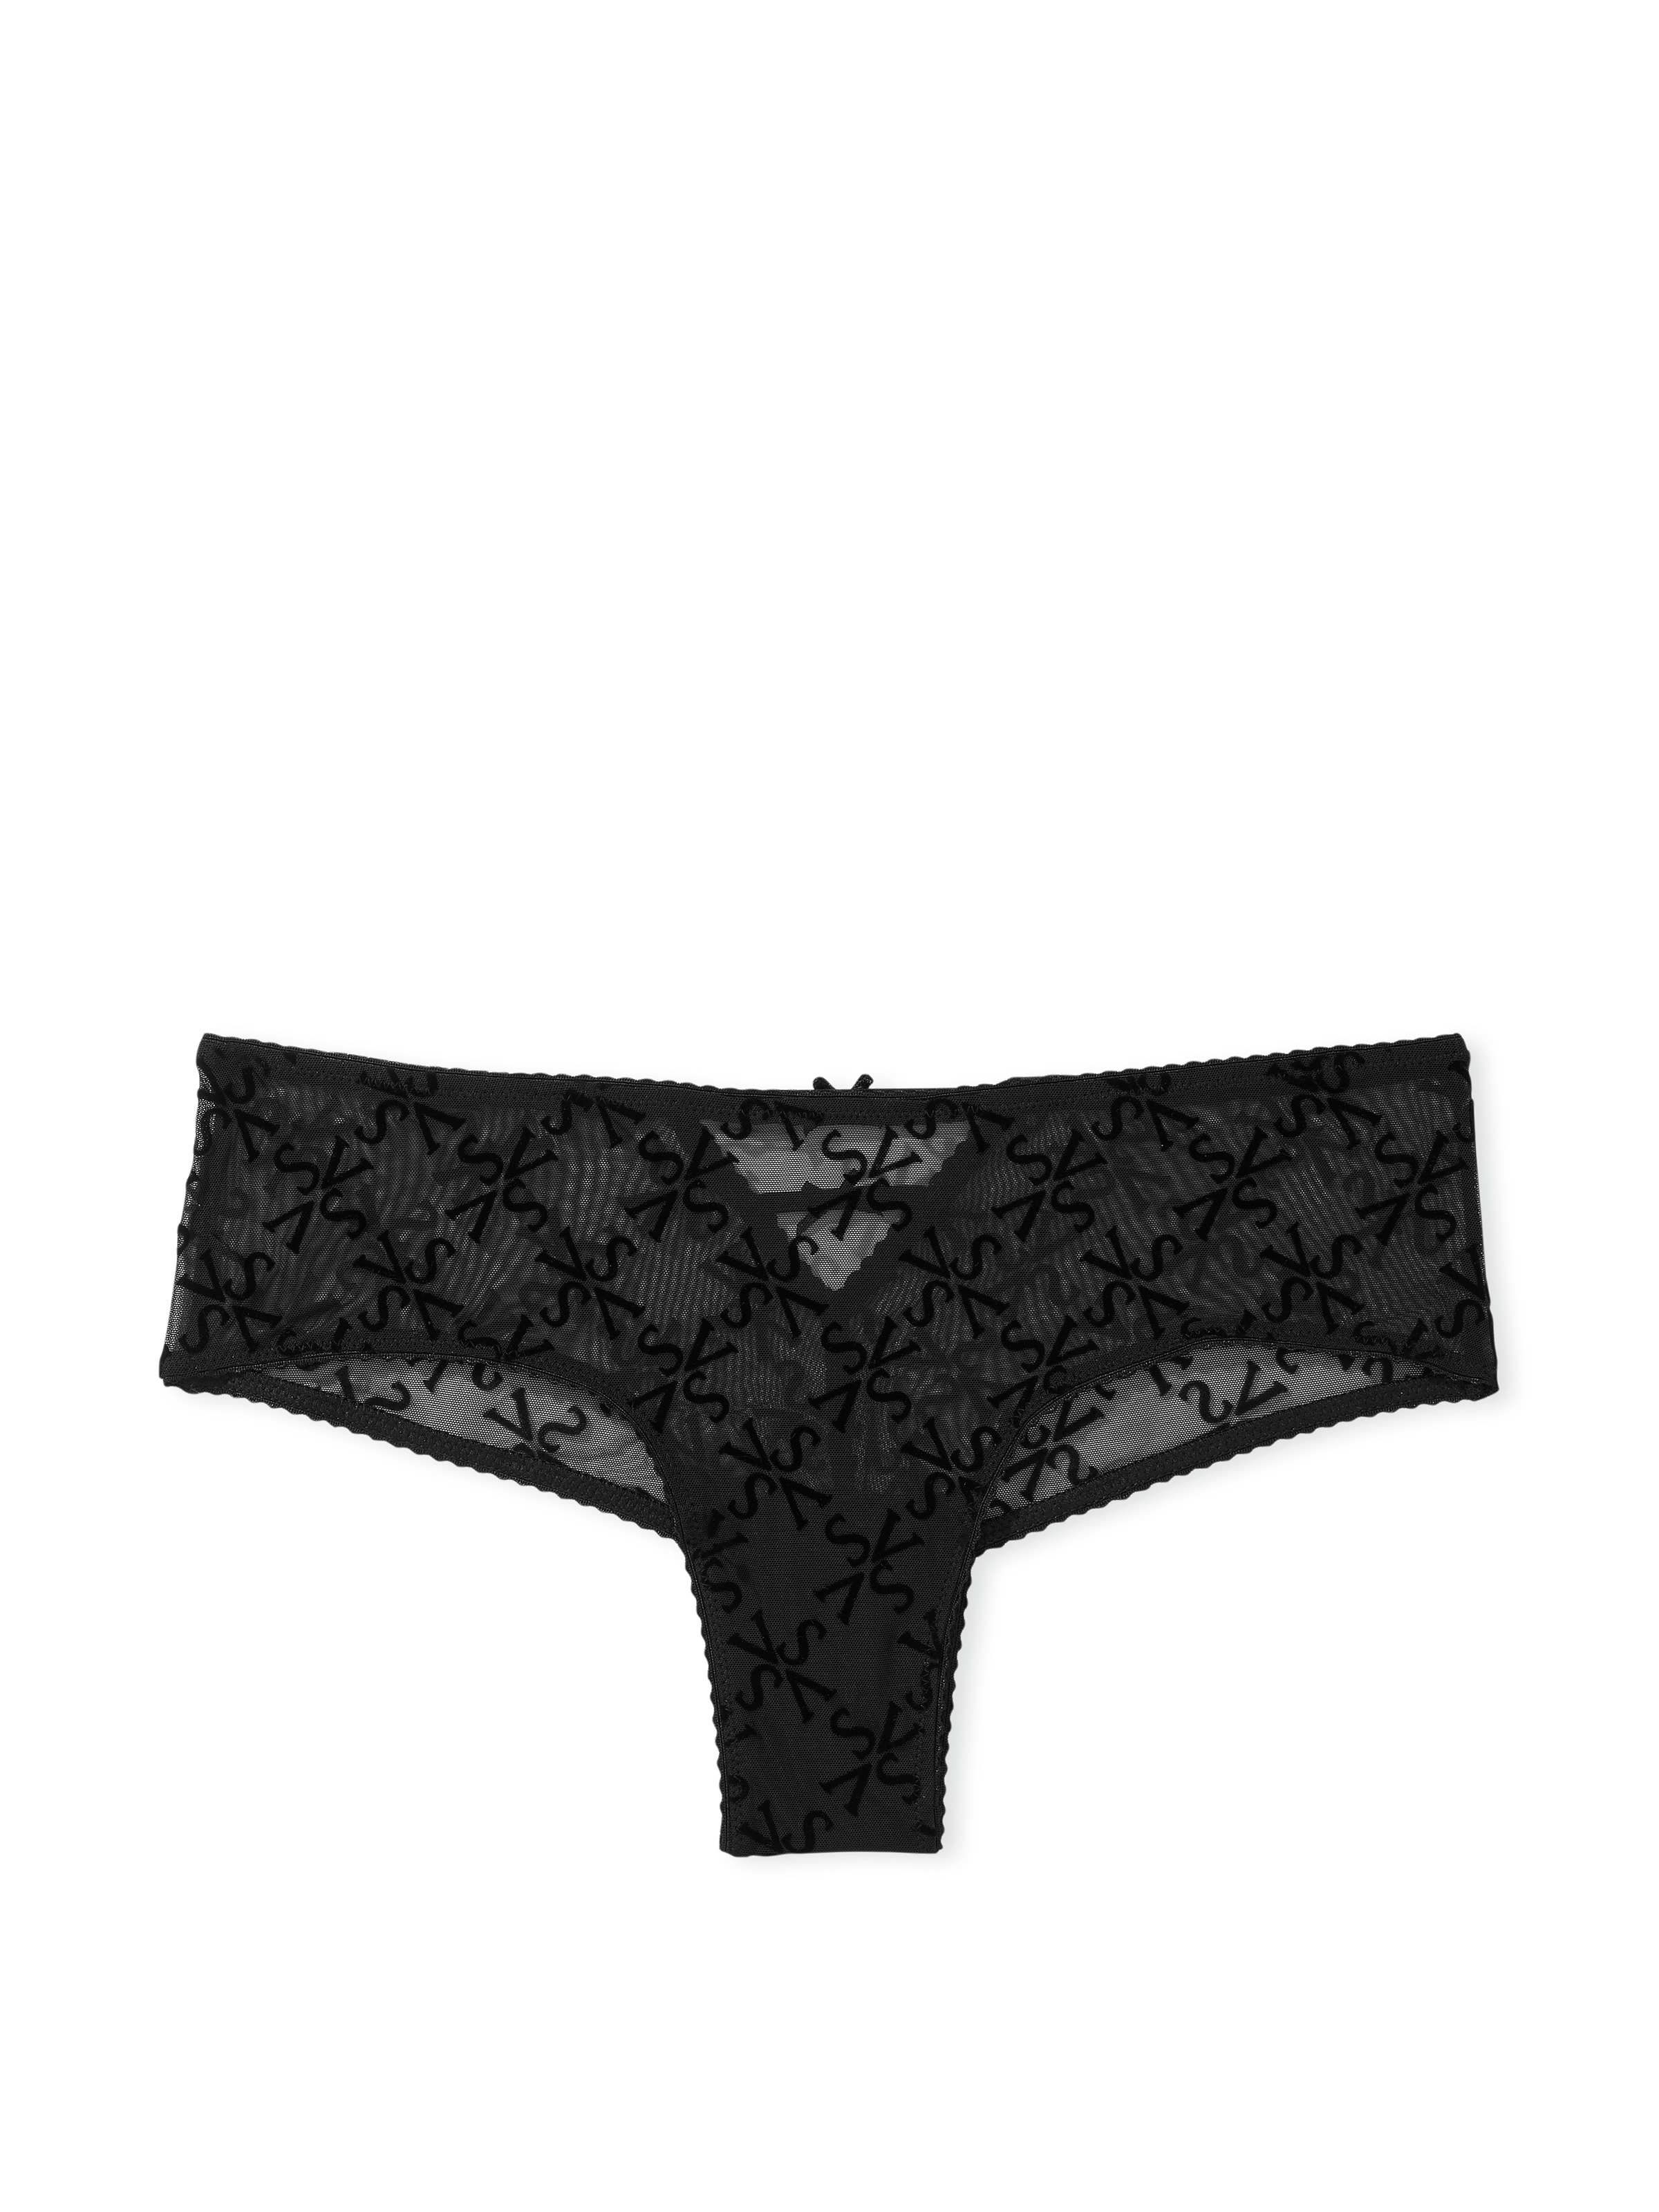 Logo Mesh Cheeky Panty image number null